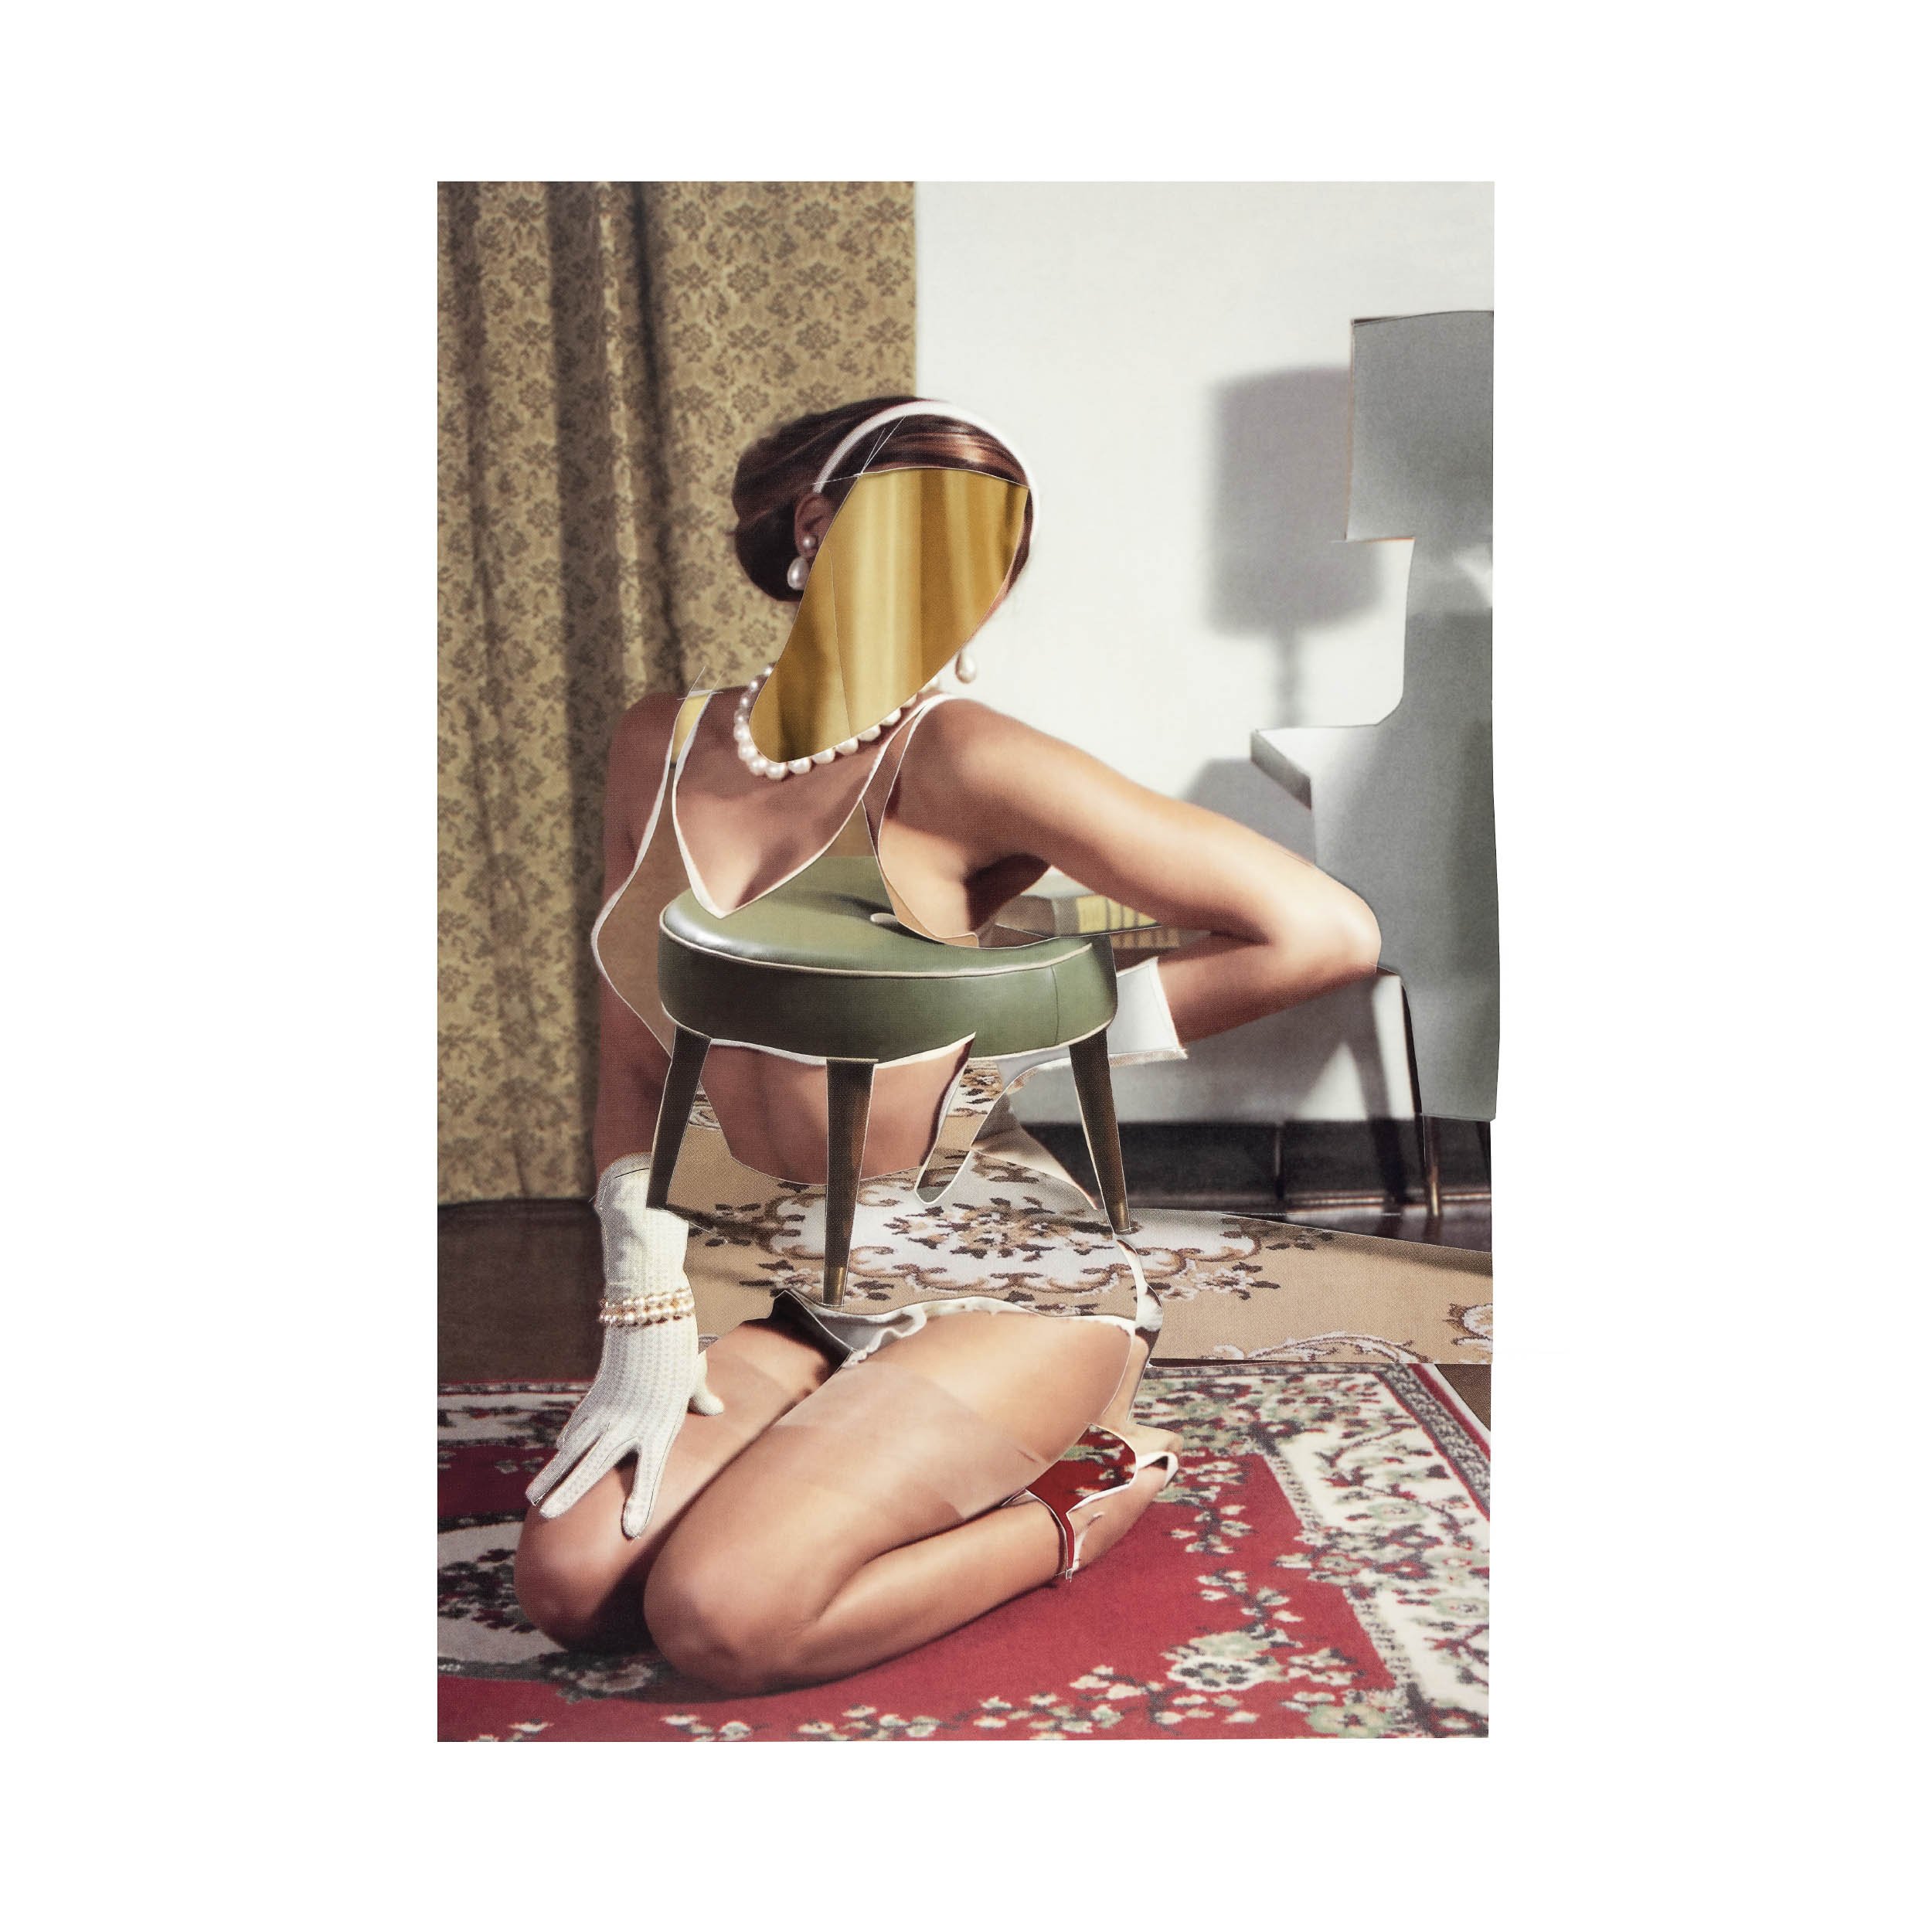 Web K Young Collage_ Female with Green Stool 2021_ 2,500 x 2,500 px 300dpi copy 2.jpg